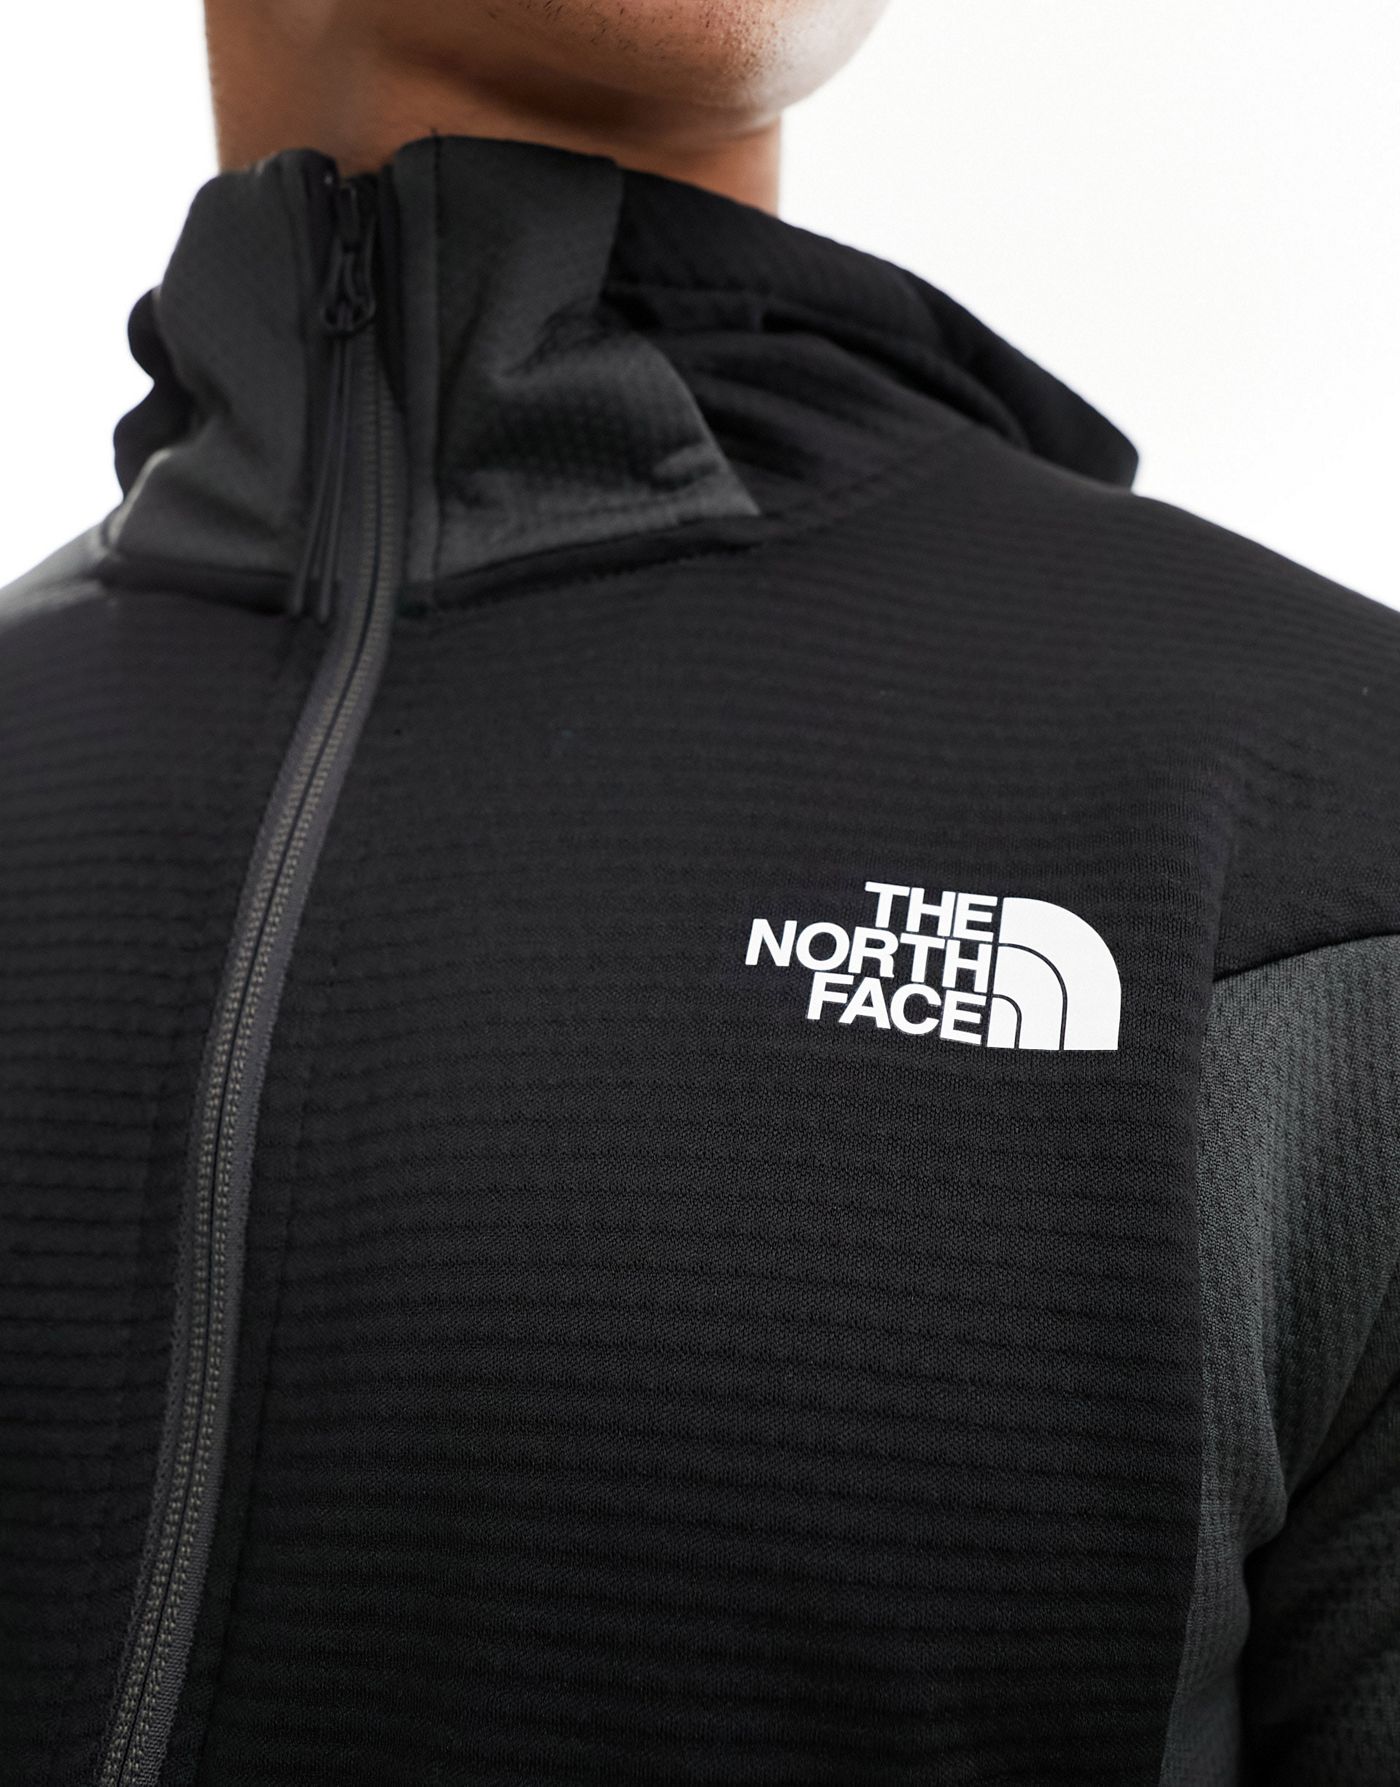 The North Face Training Mountain Athletic zip up fleece hoodie in grey